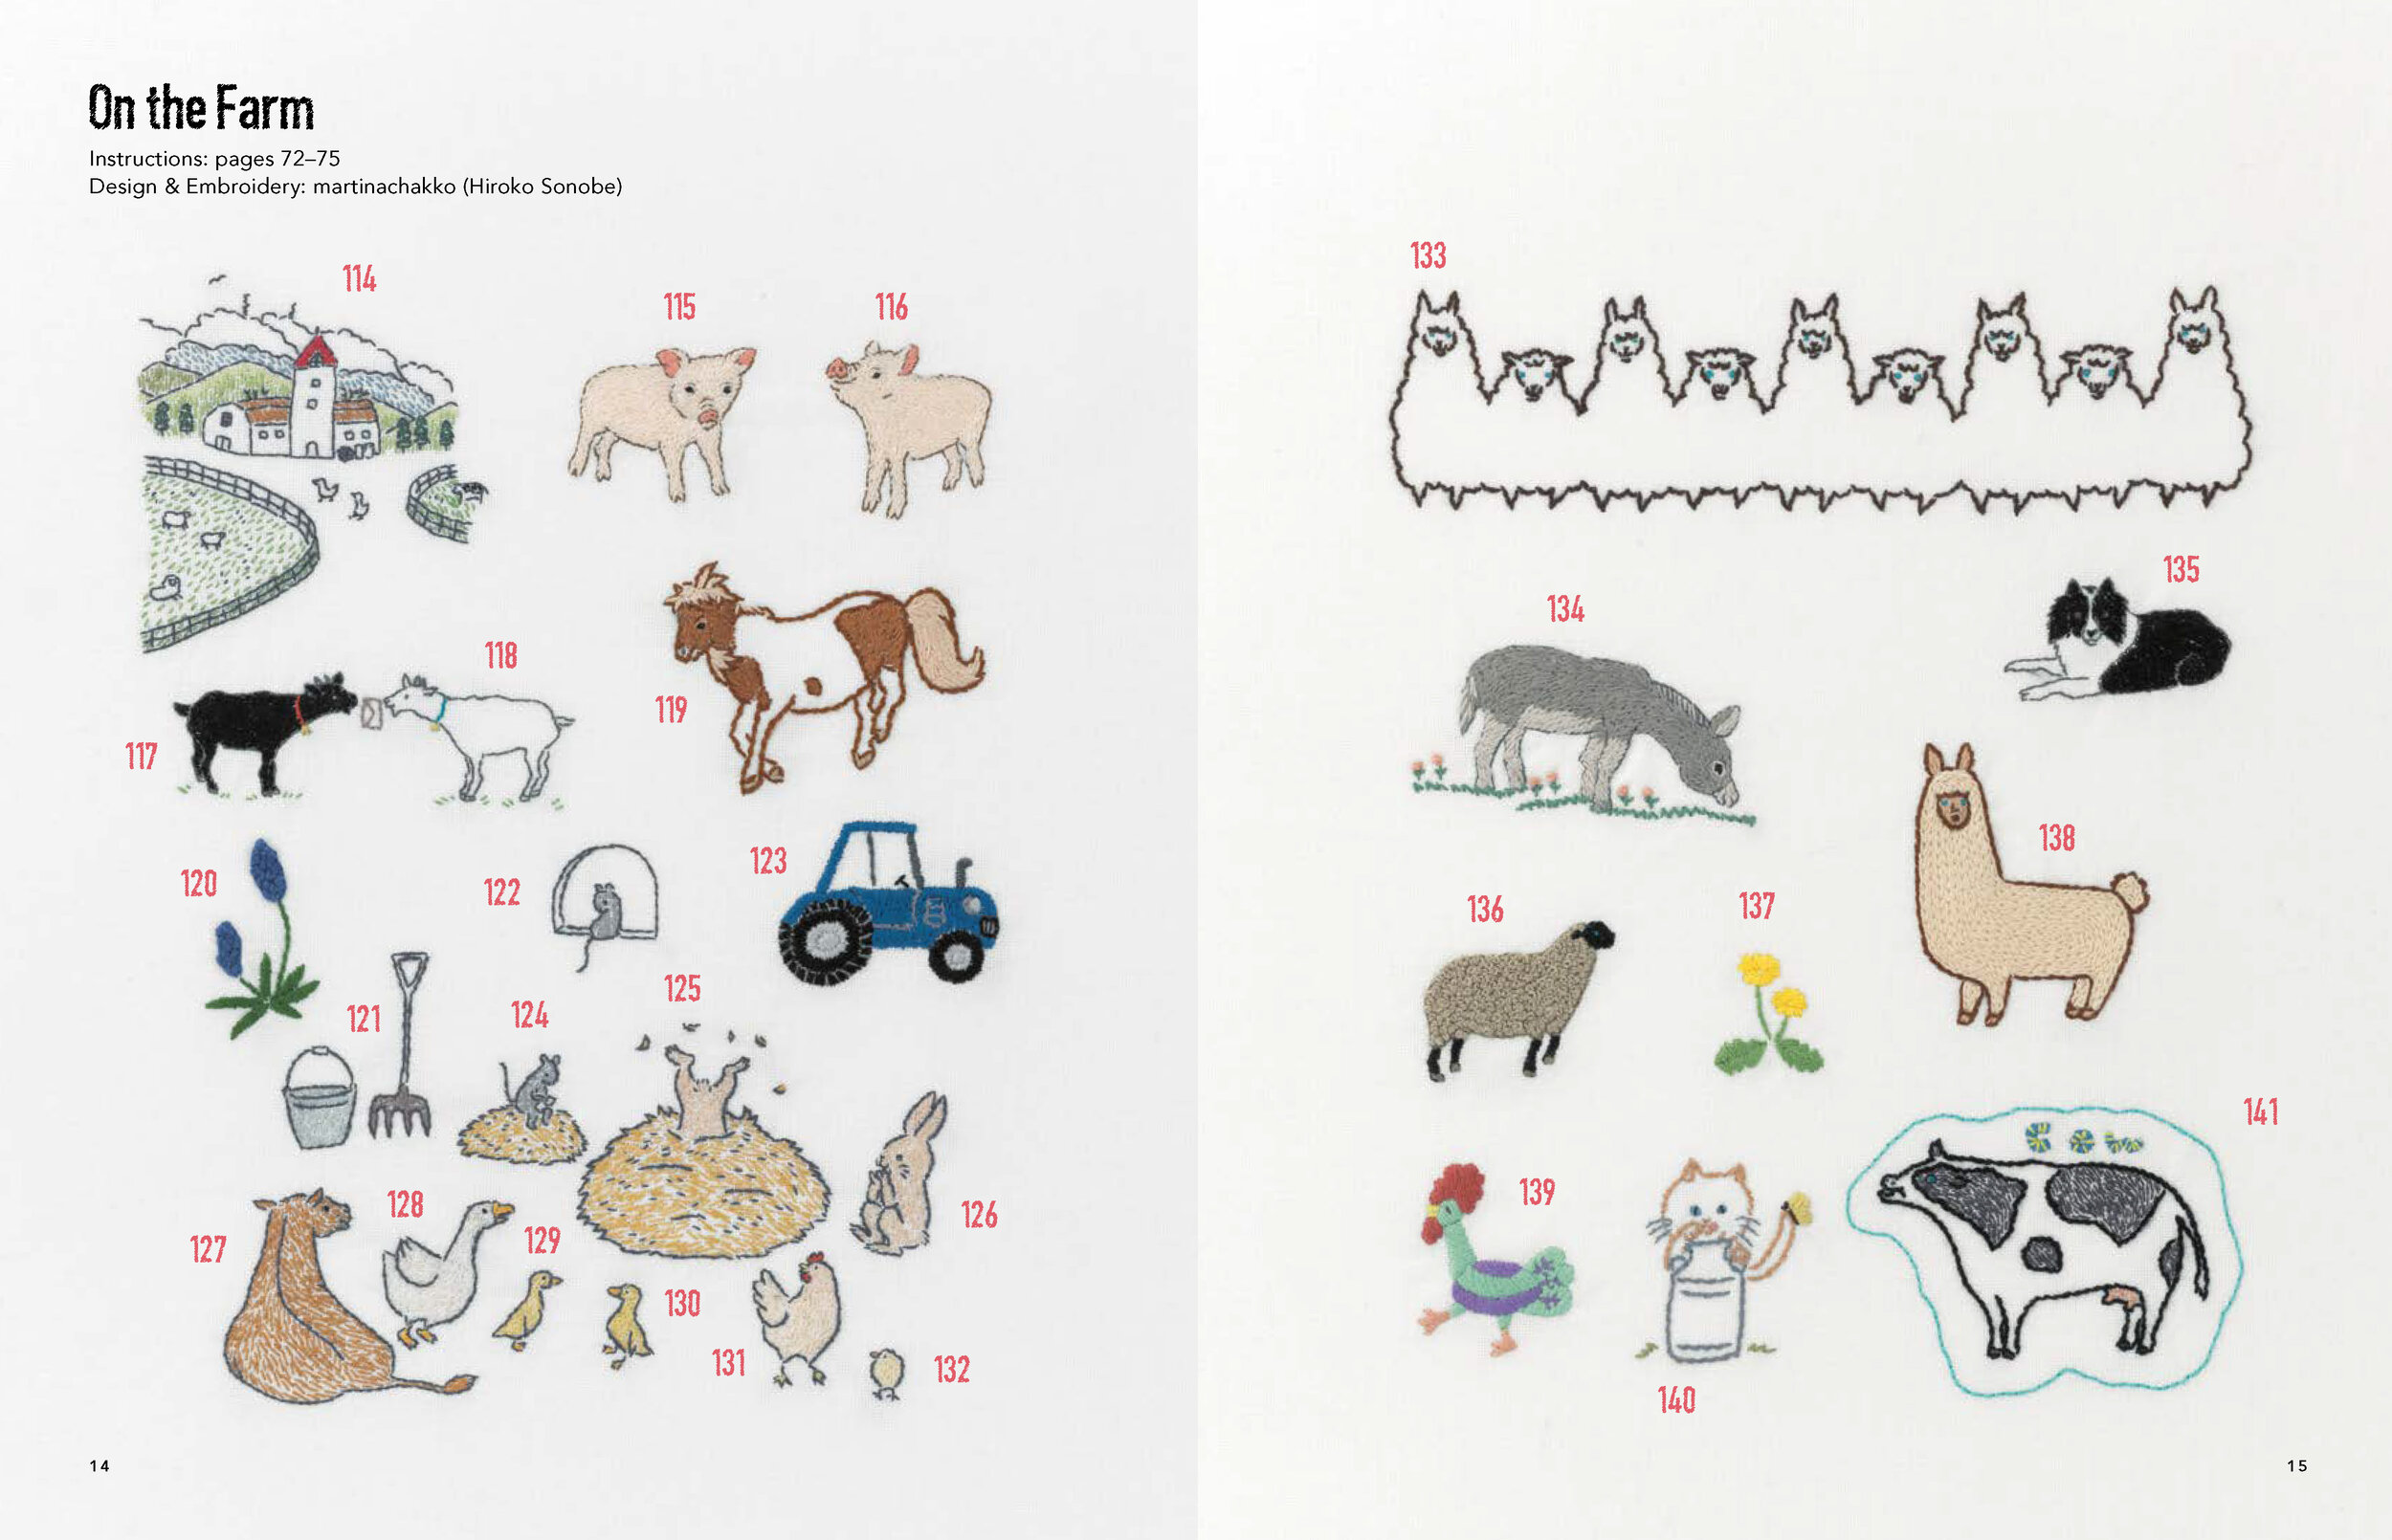 How to Embroider Almost Every Animal 14.15.jpg